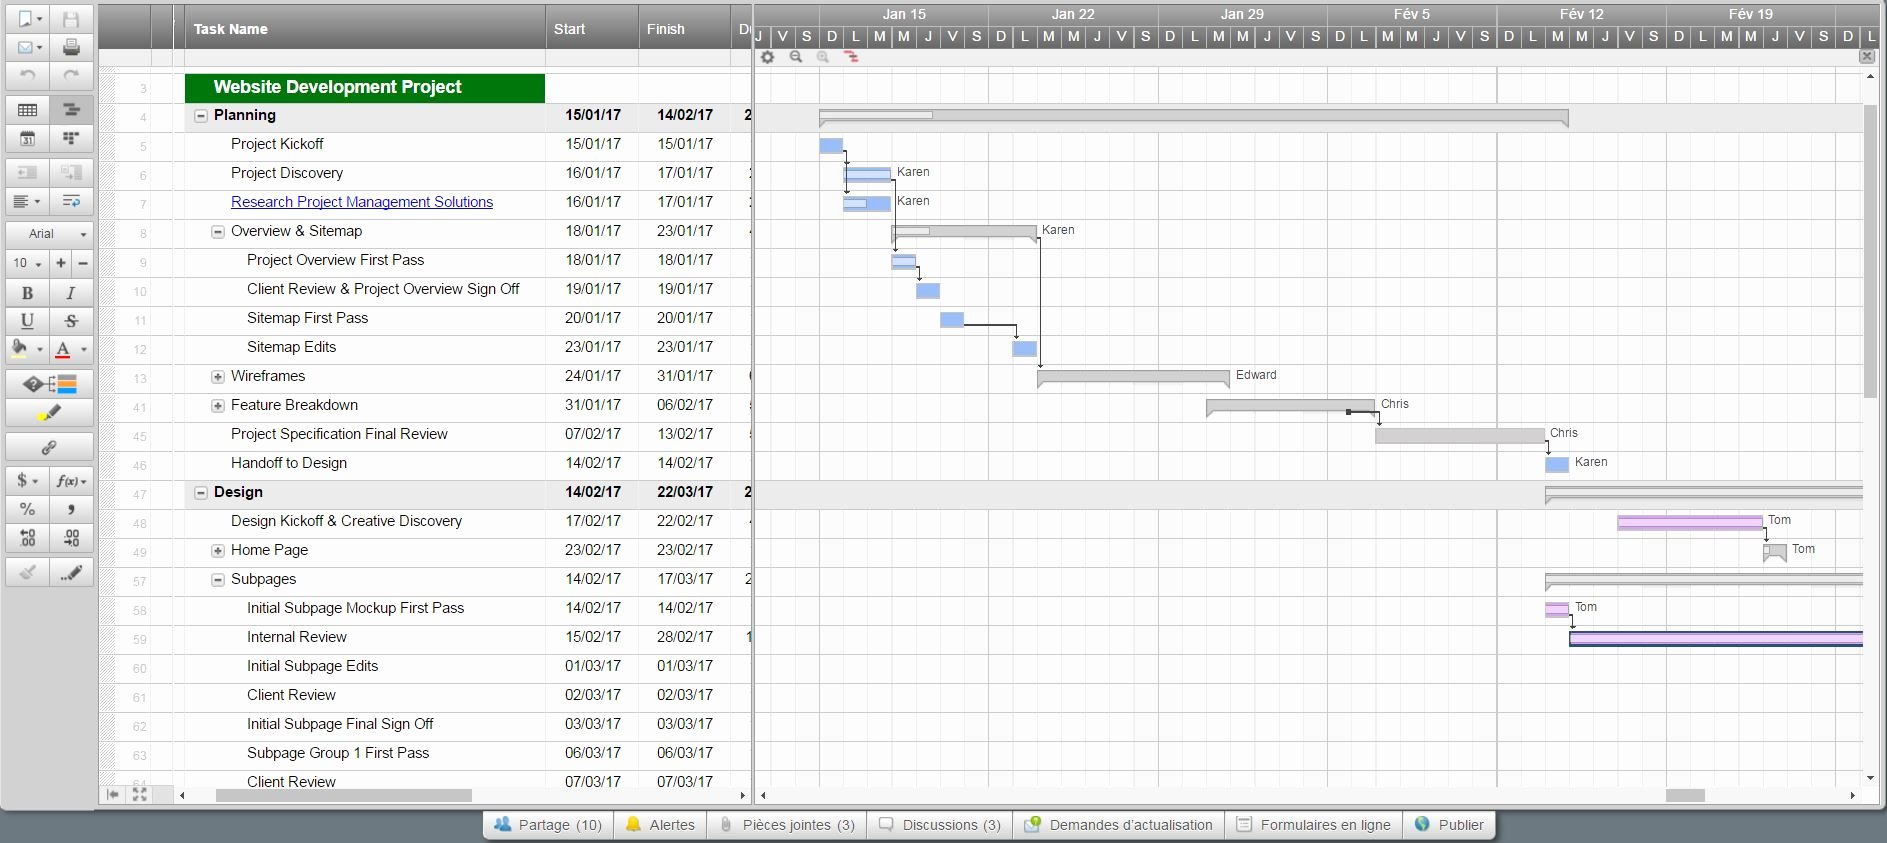 Marketing Timeline Template Excel Awesome Timeline Spreadsheet Template Spreadsheet Templates for